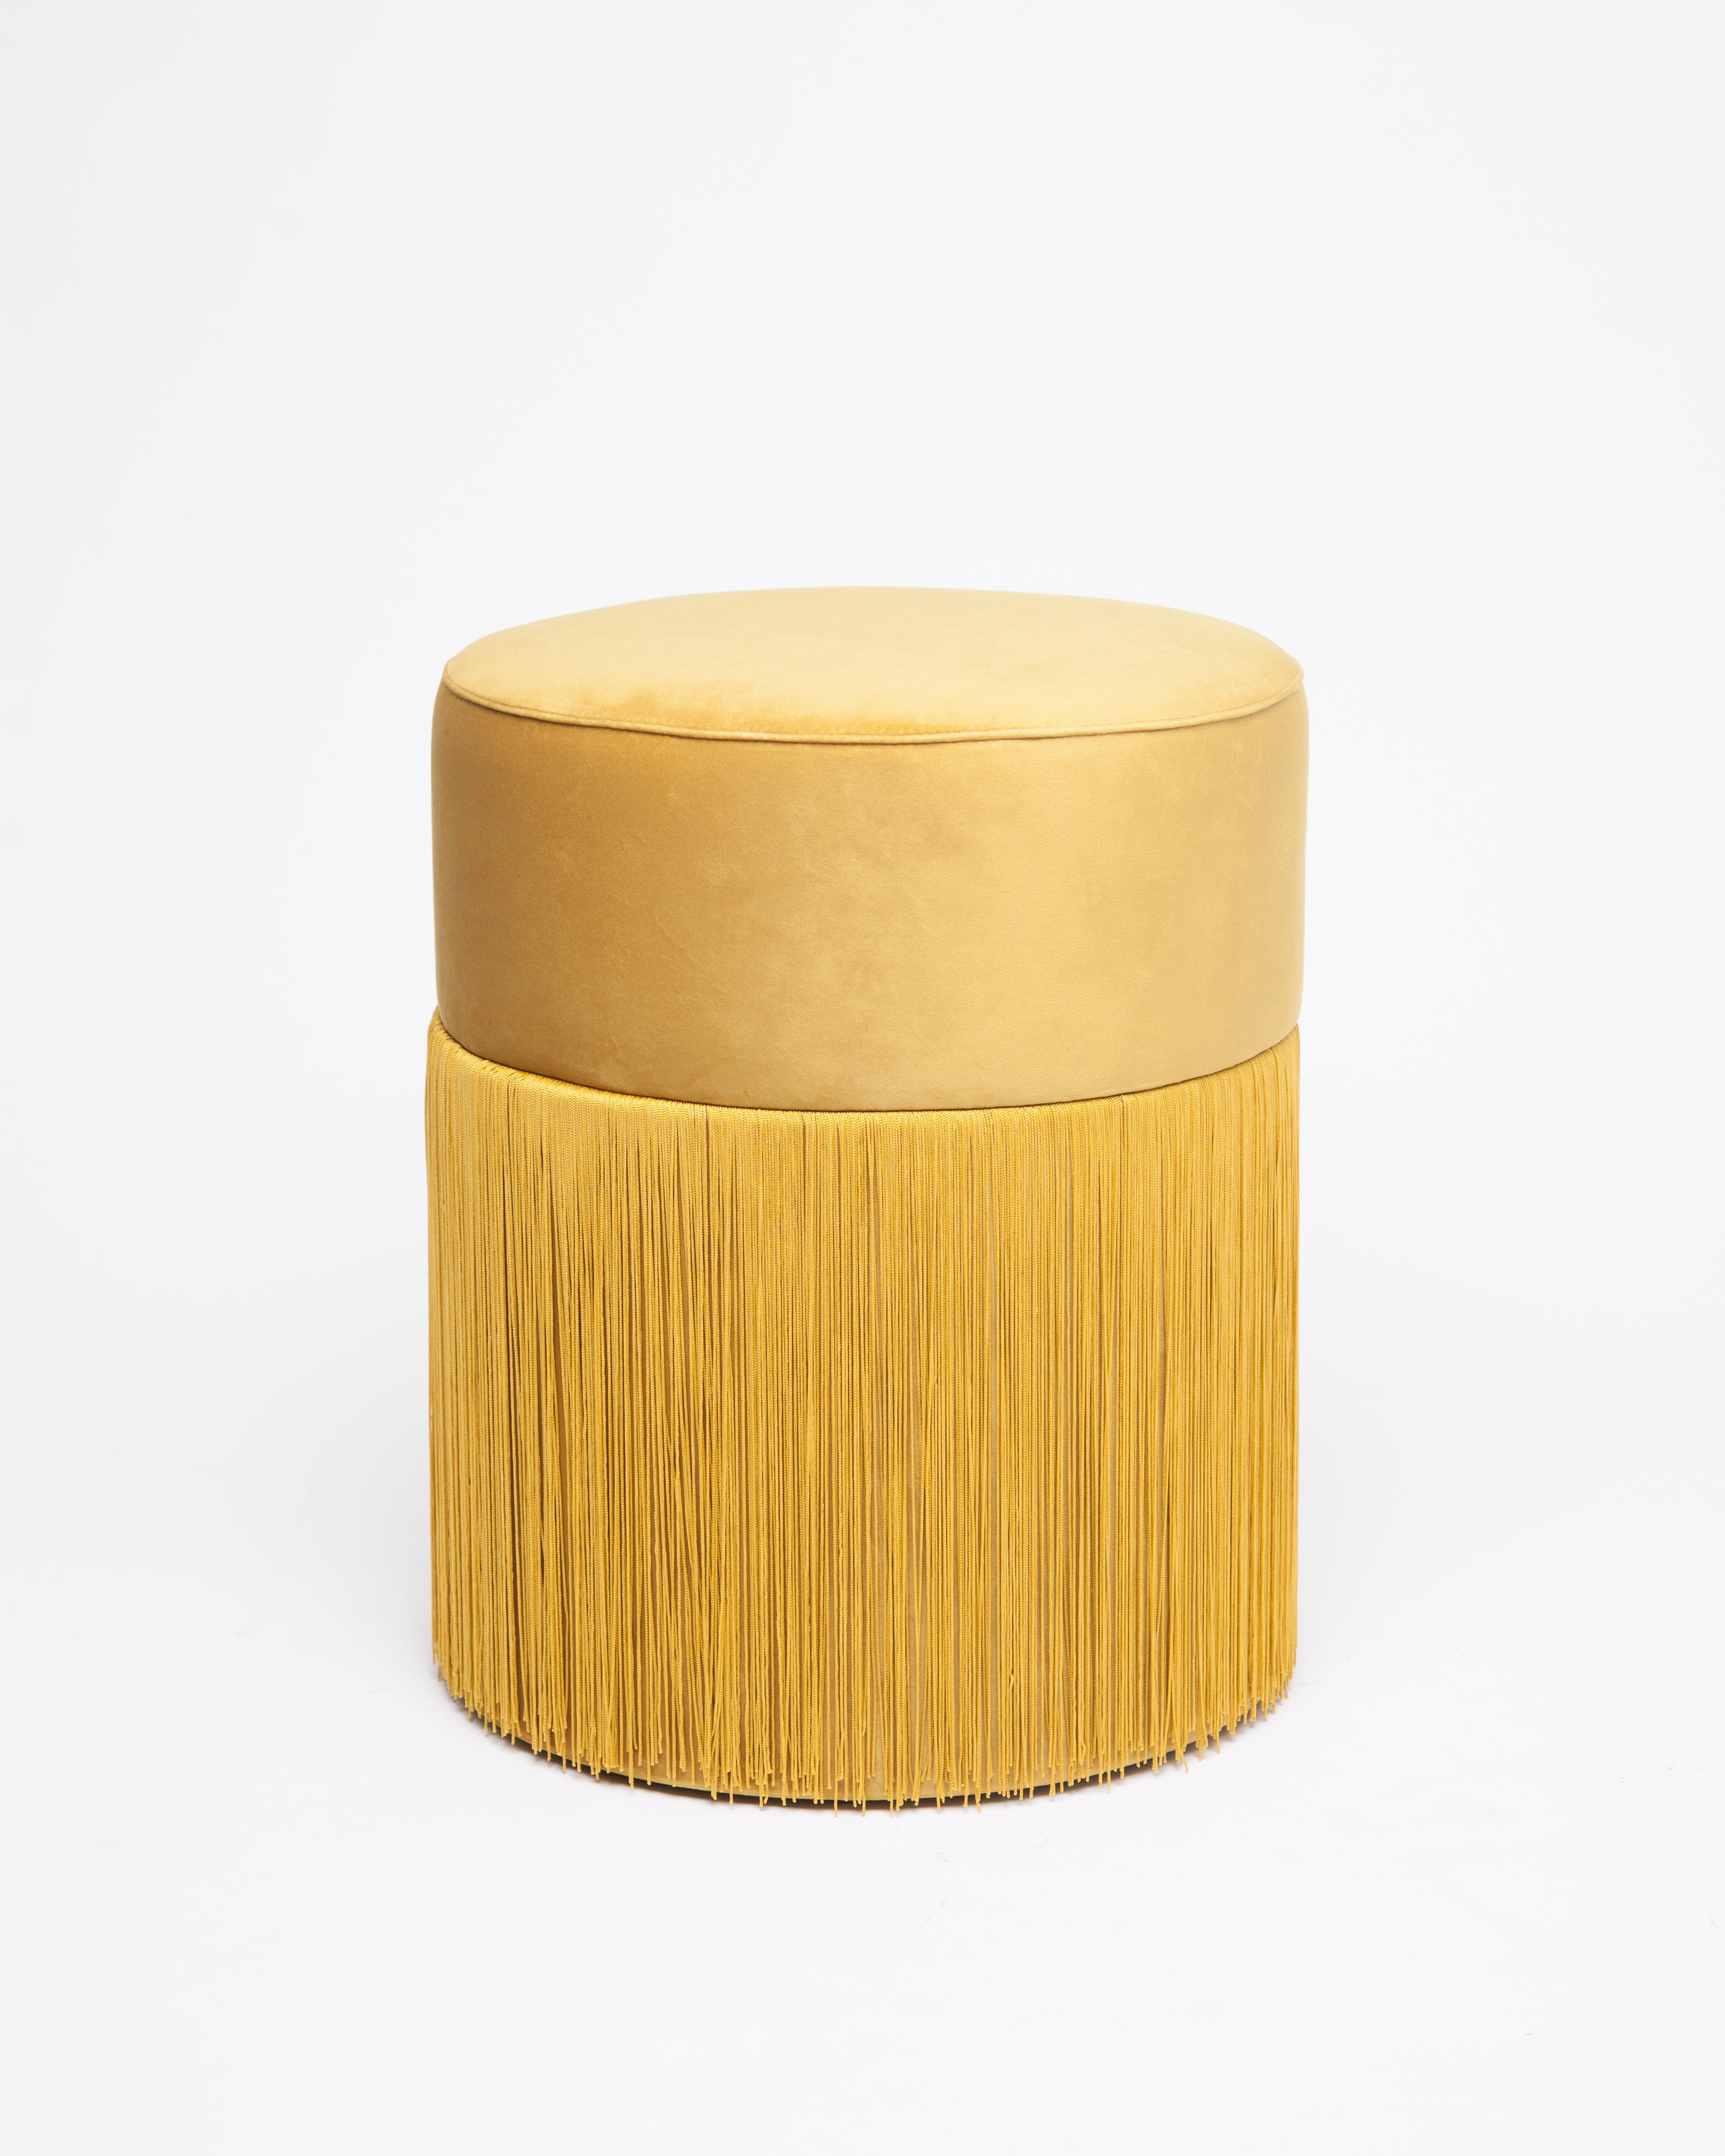 Pouf pill S by Houtique
Dimensions: H 45 x D 35 cm
Materials: Velvet upholstery and 30cm fringes

Pill Pouf S
Art Deco style pouf with wood structure and velvet fabric.
2 fiber-board discs of 16mm, joined by wooden tufts.
Upholstery Velvet 100%